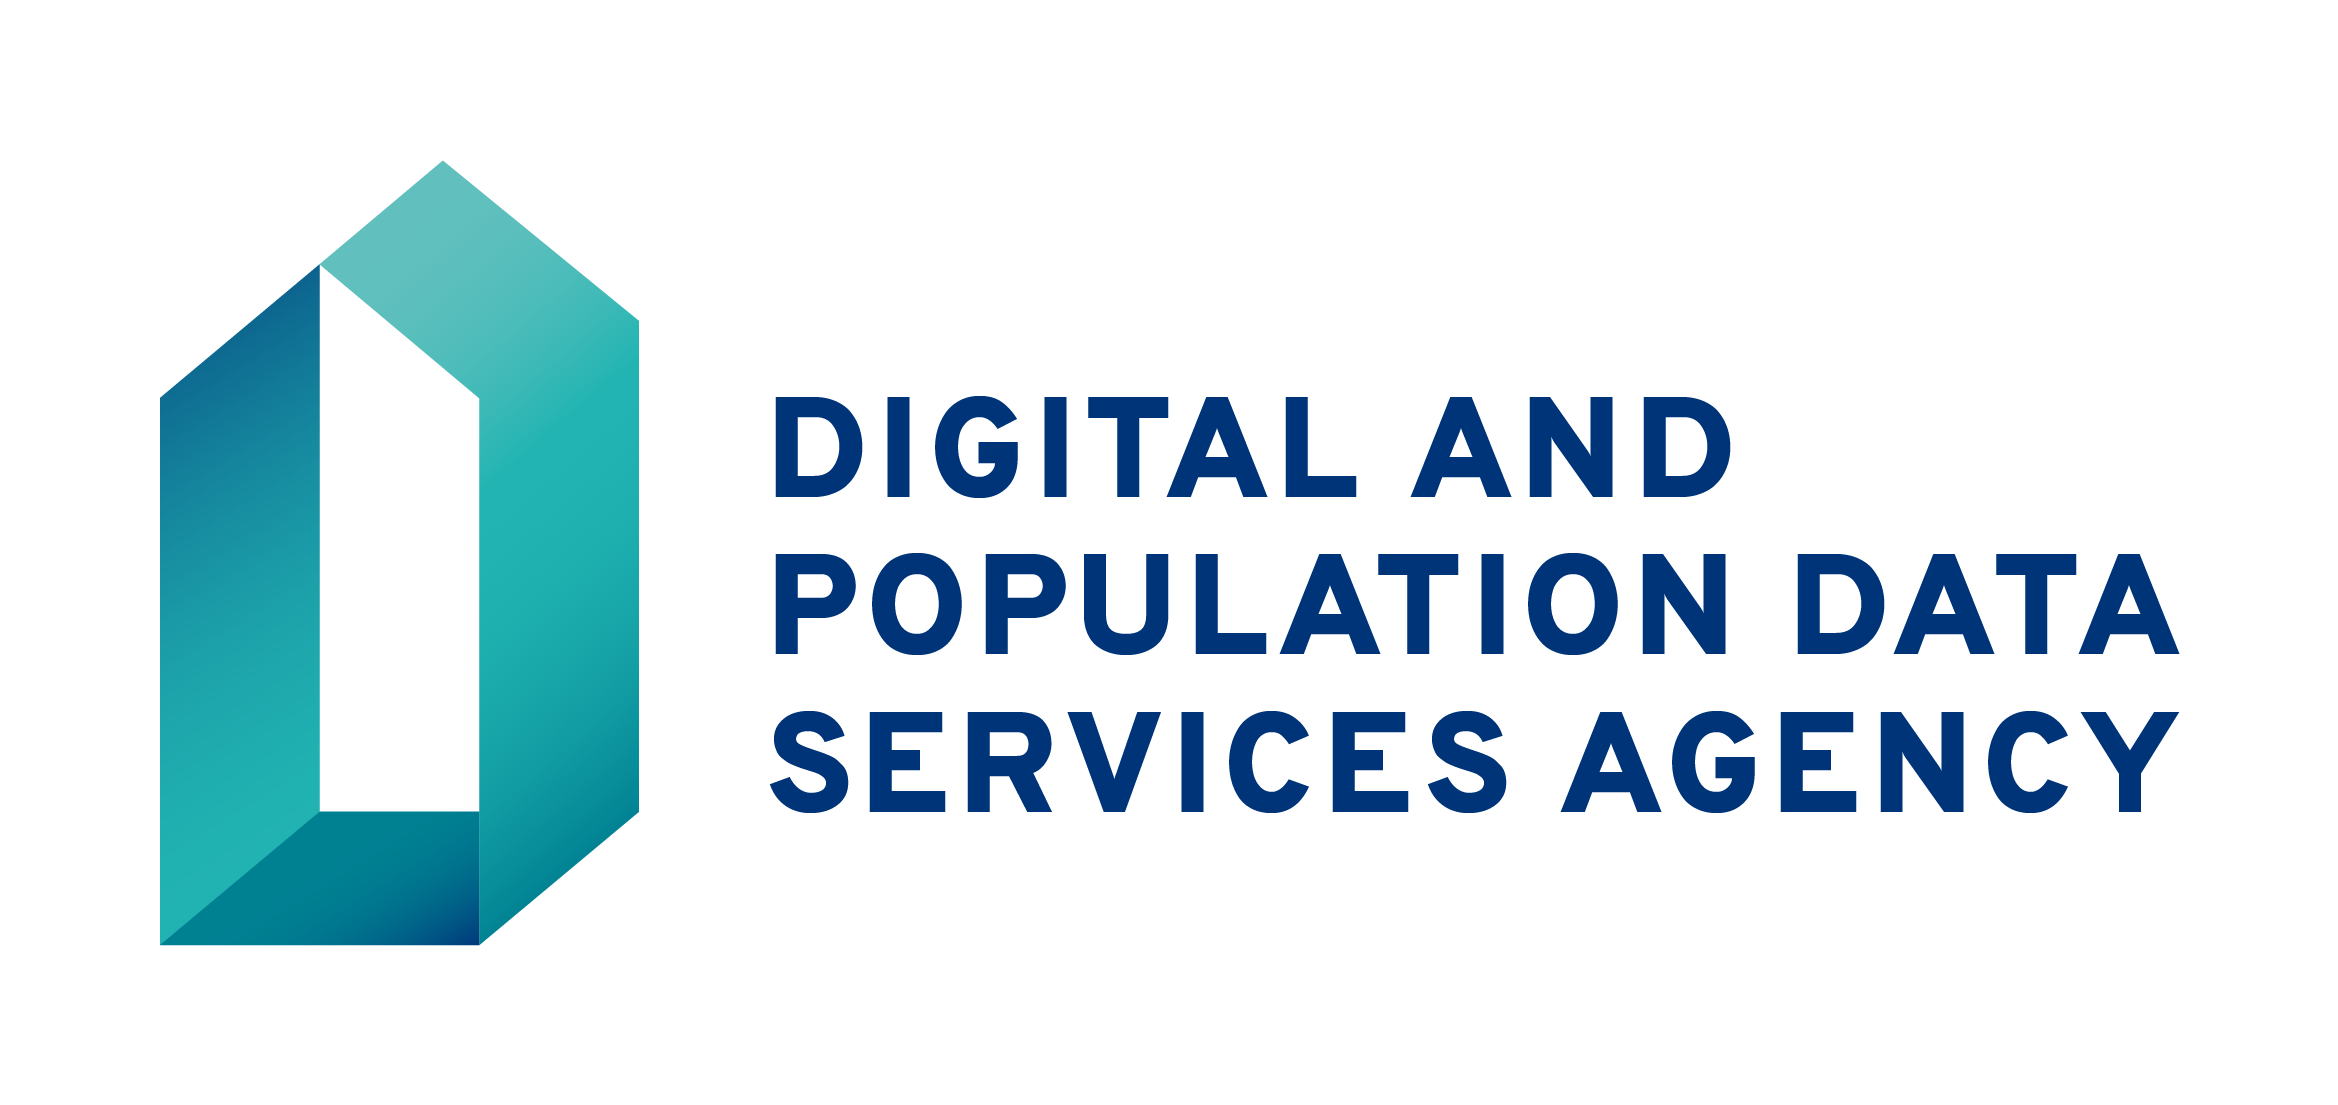 the Digital and Population Data Services Agency's logo